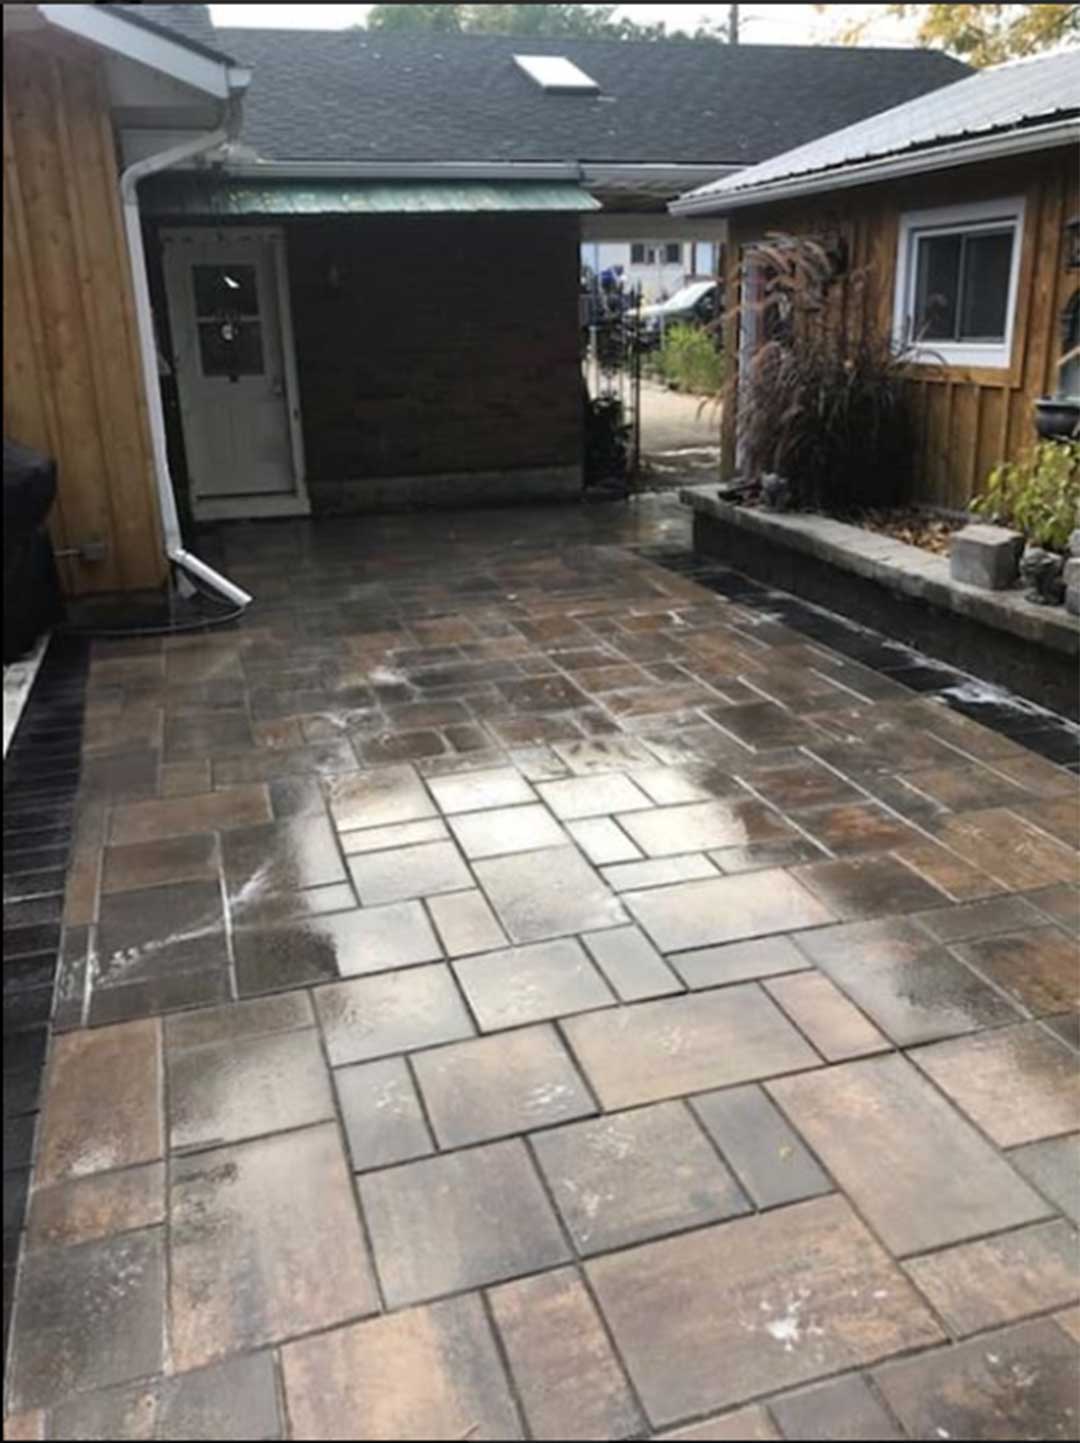 interlocking stone walkway and patio area in back of residence